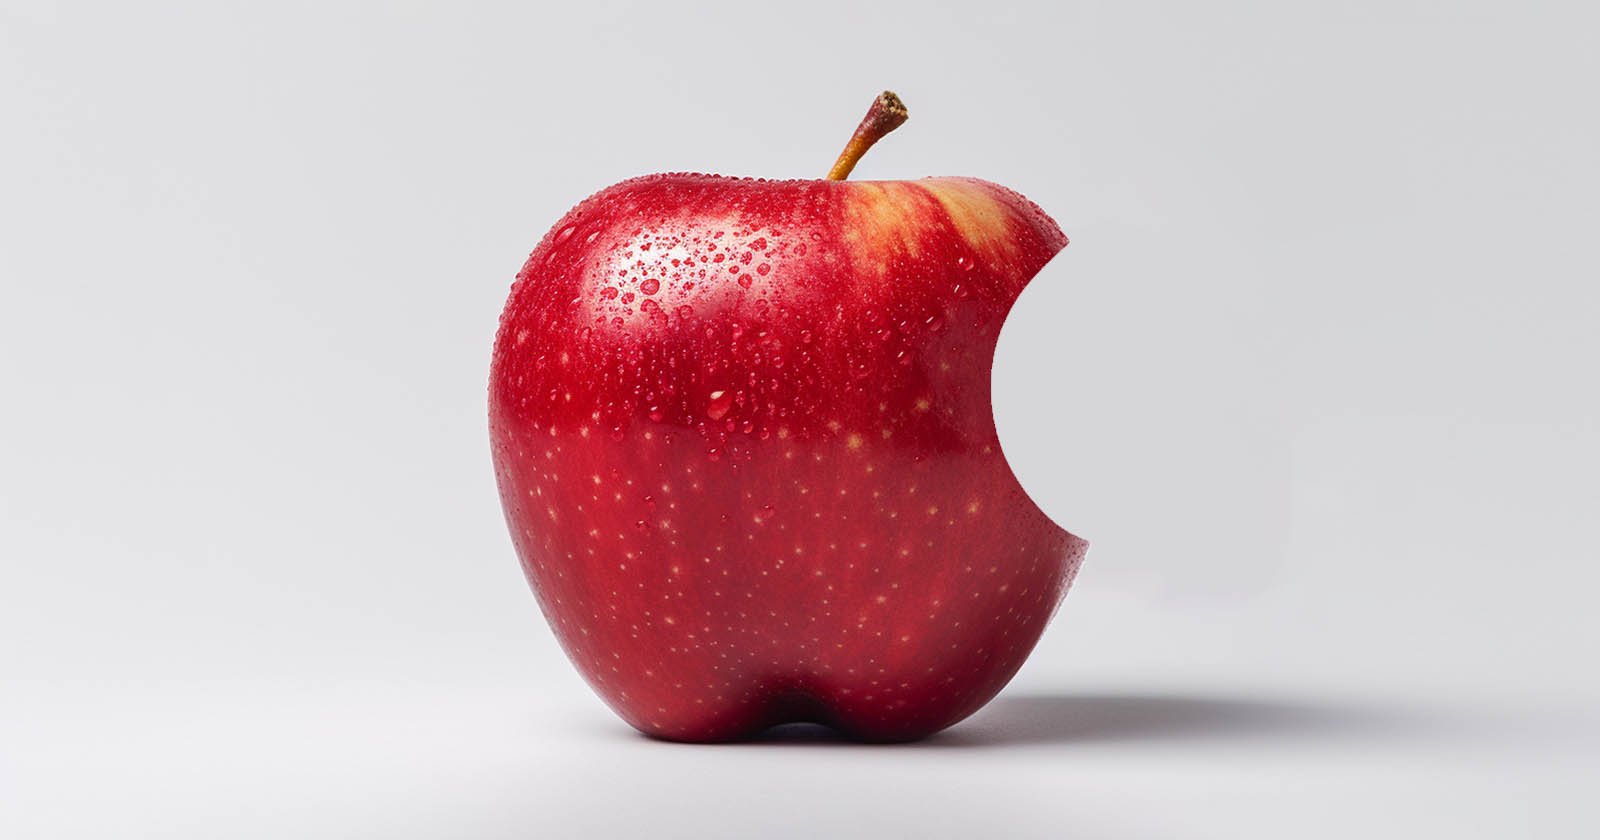  apple wants own rights real apples 